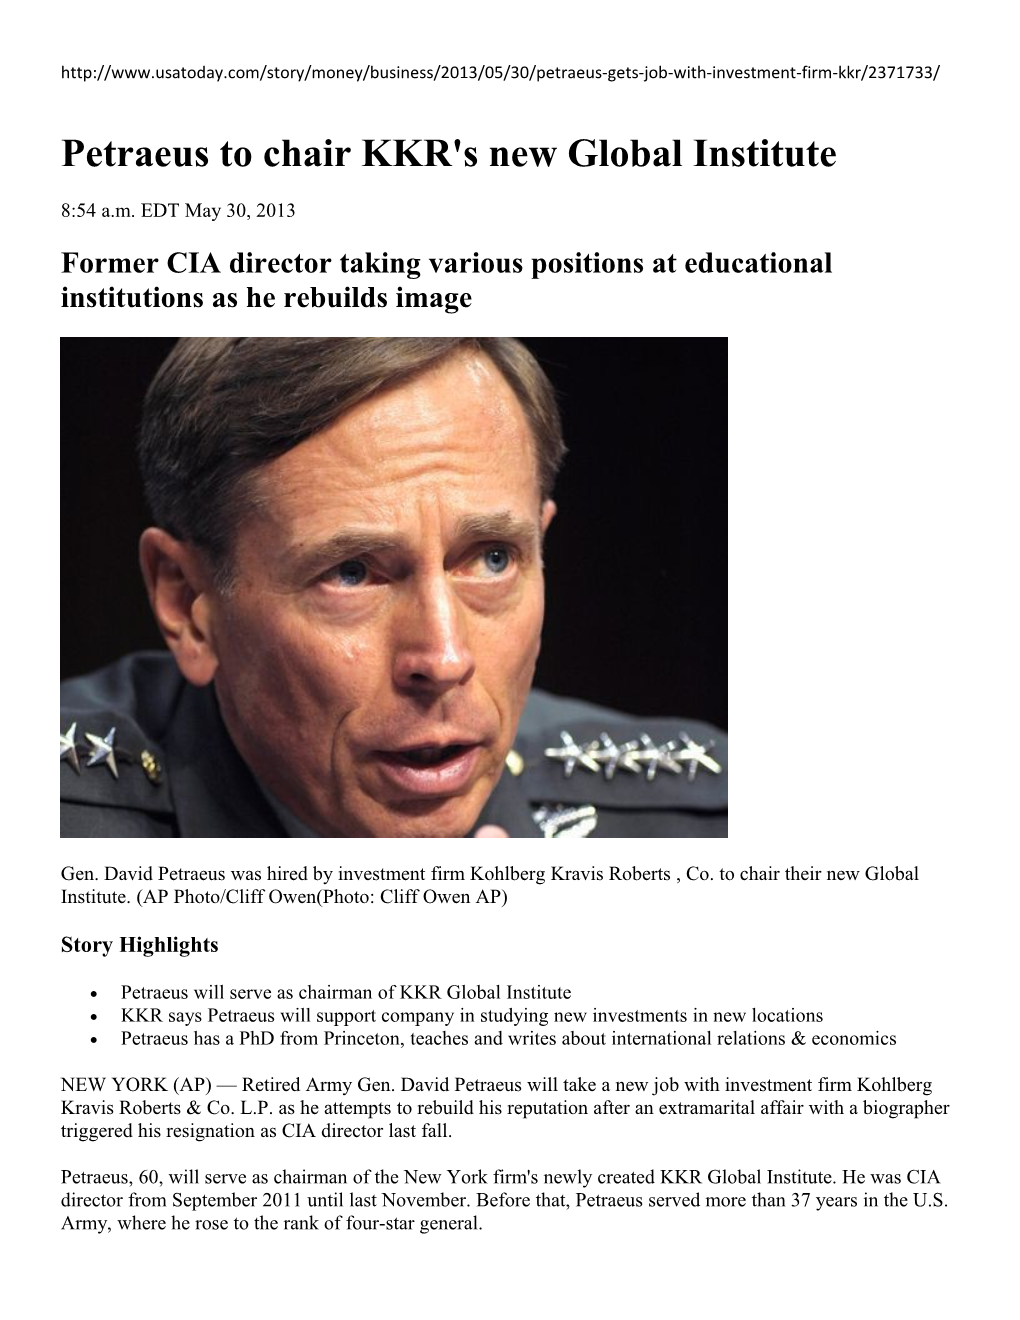 Petraeus to Chair KKR's New Global Institute